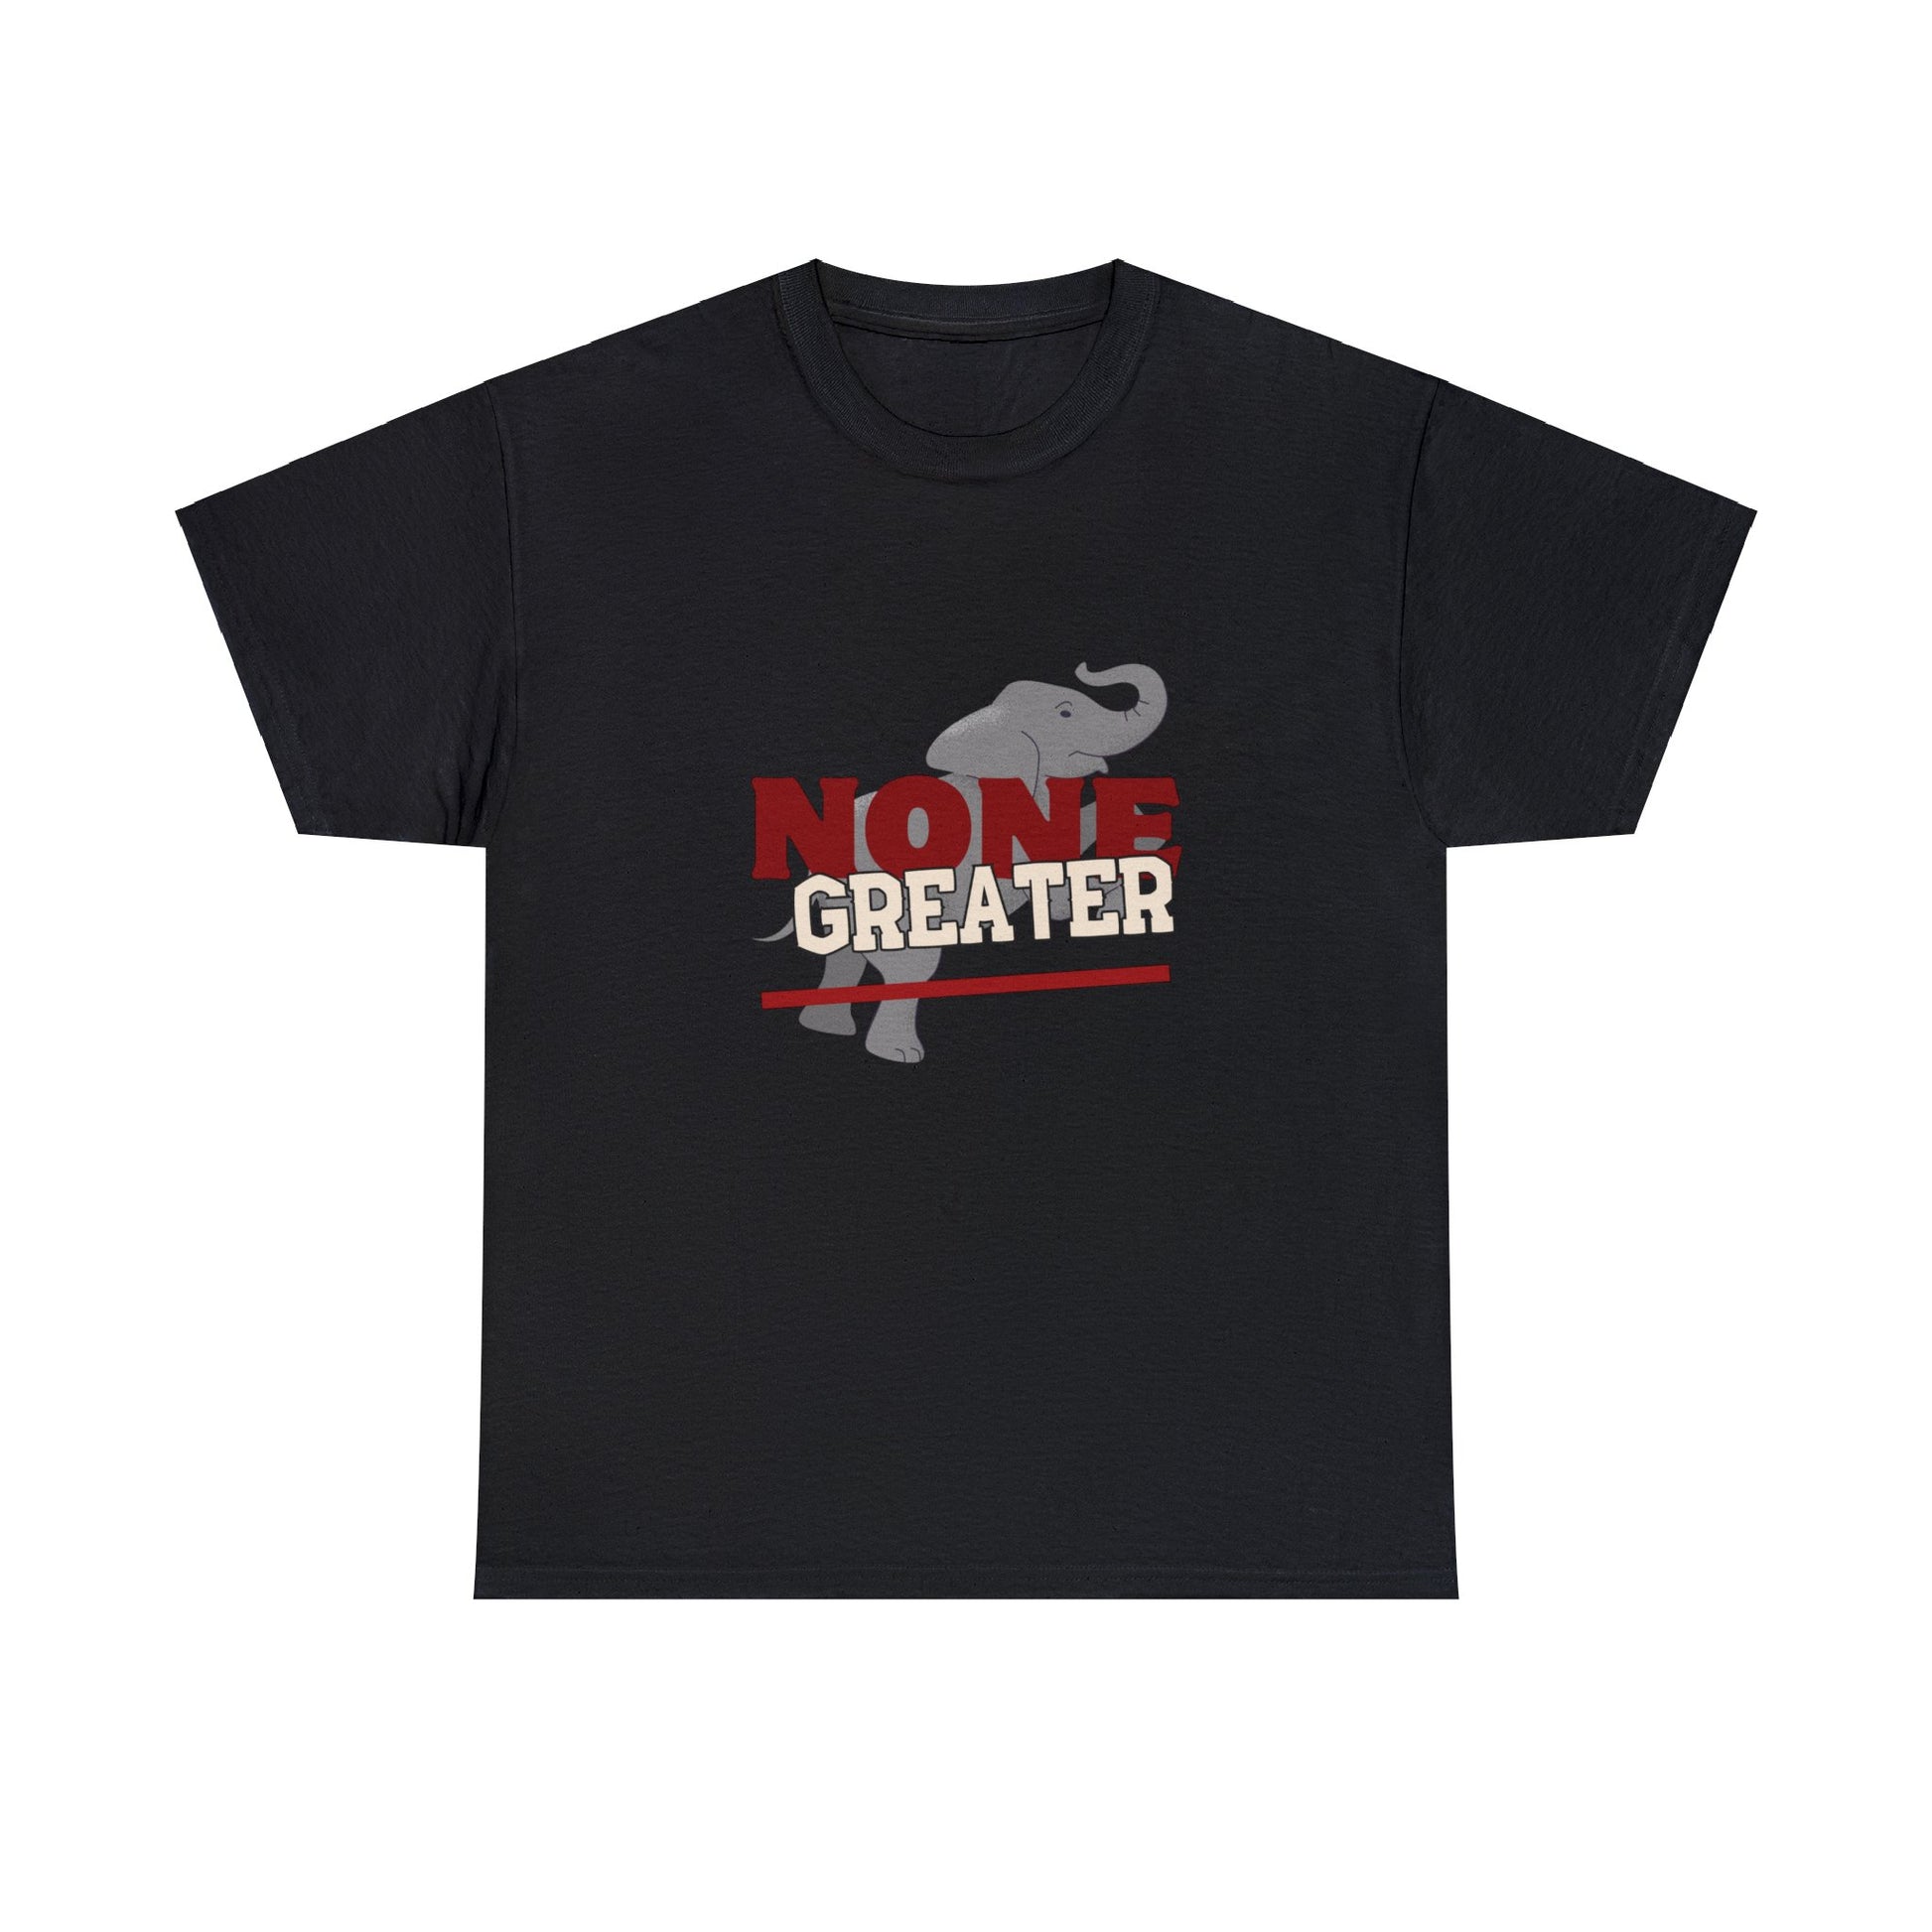 Black Unisex Heavy Cotton Tee w/saying "None Greater" in Red/white with Grey Elephant in Background